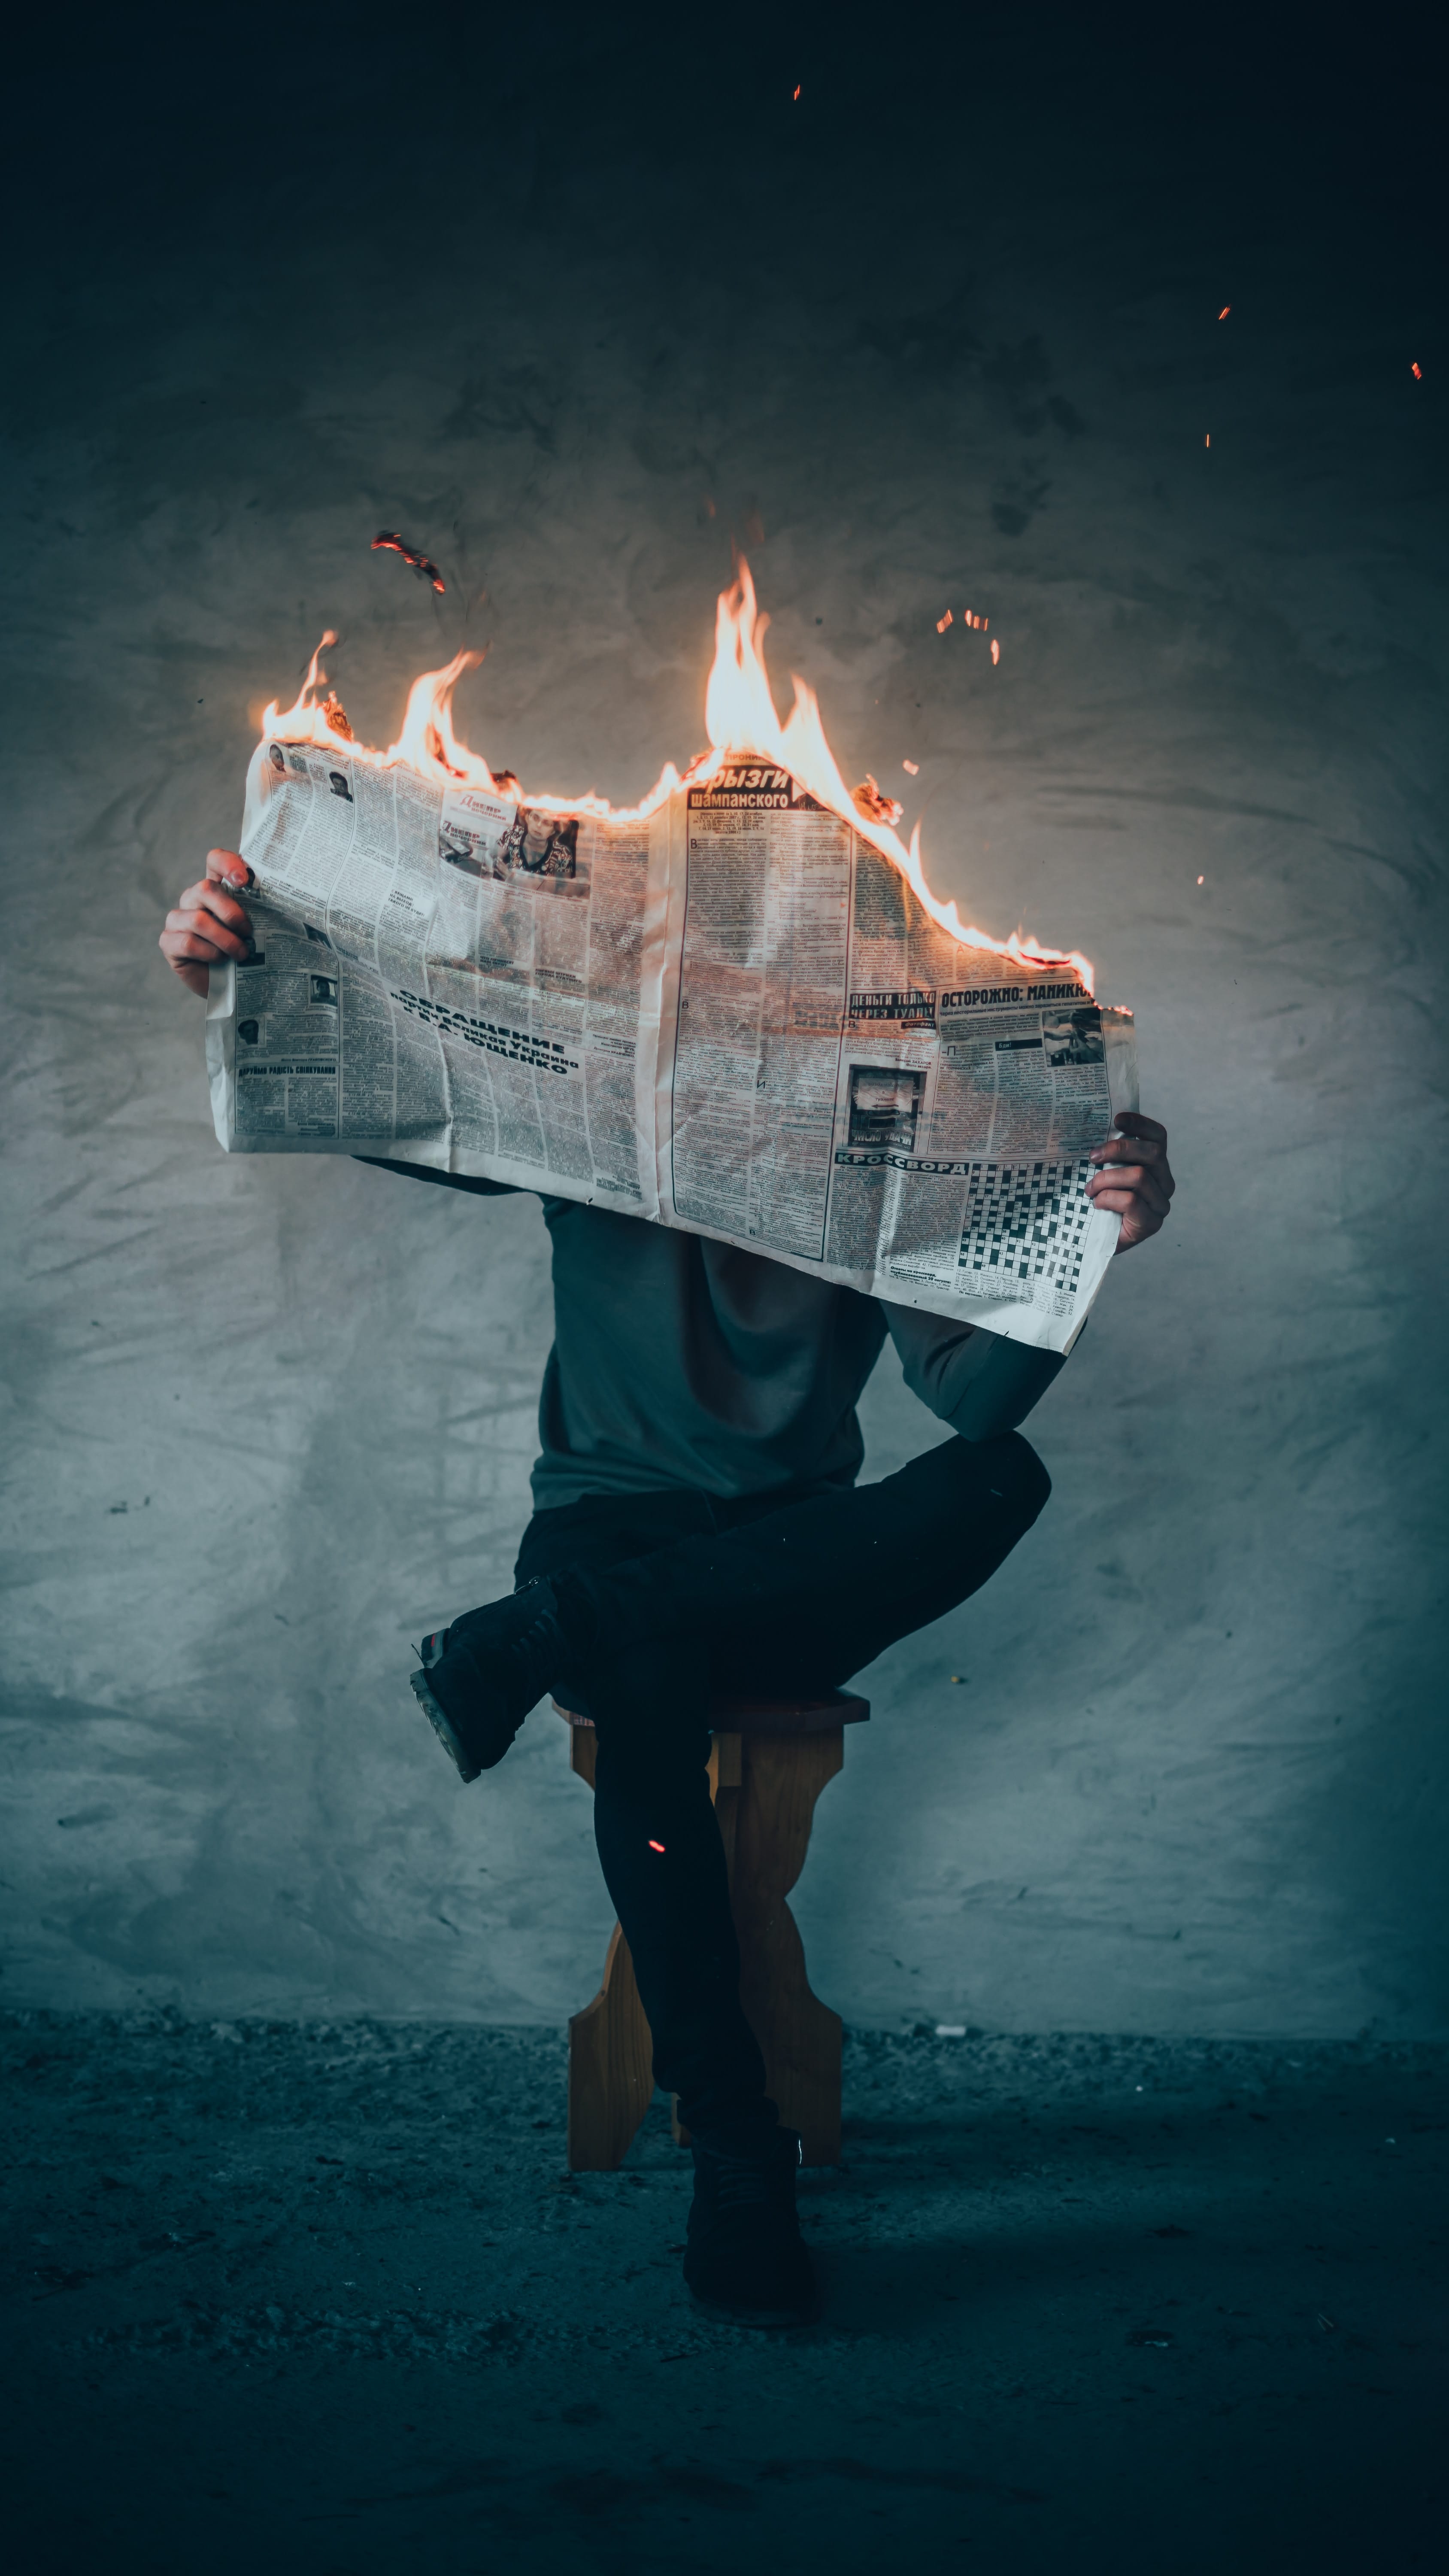 Man sitting on stool reading a newspaper that is on fire; image by Elijah O’Donnell, via Unsplash.com.